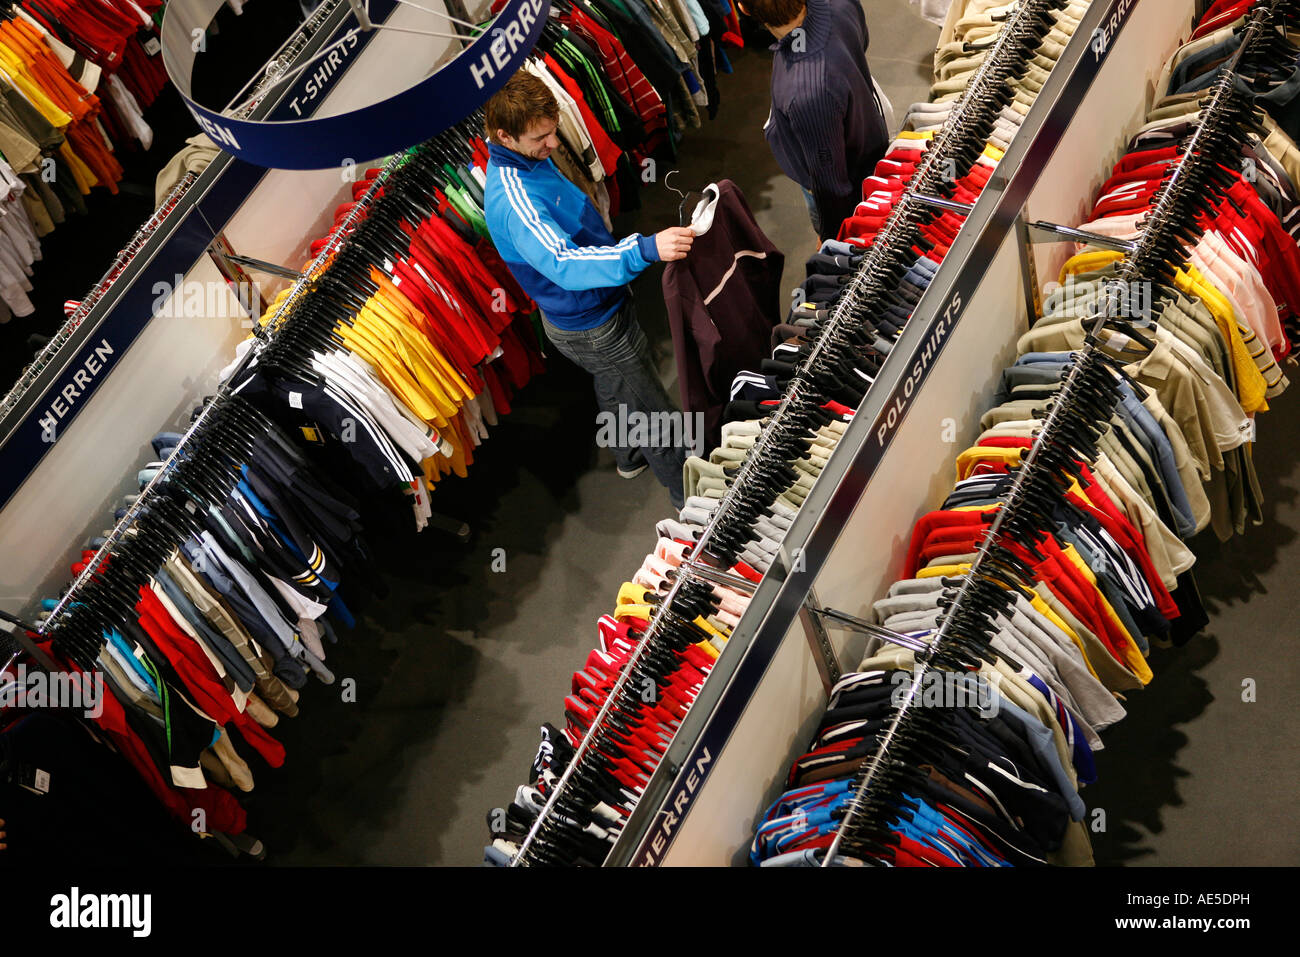 Adidas factory outlet center hi-res stock photography and images - Alamy